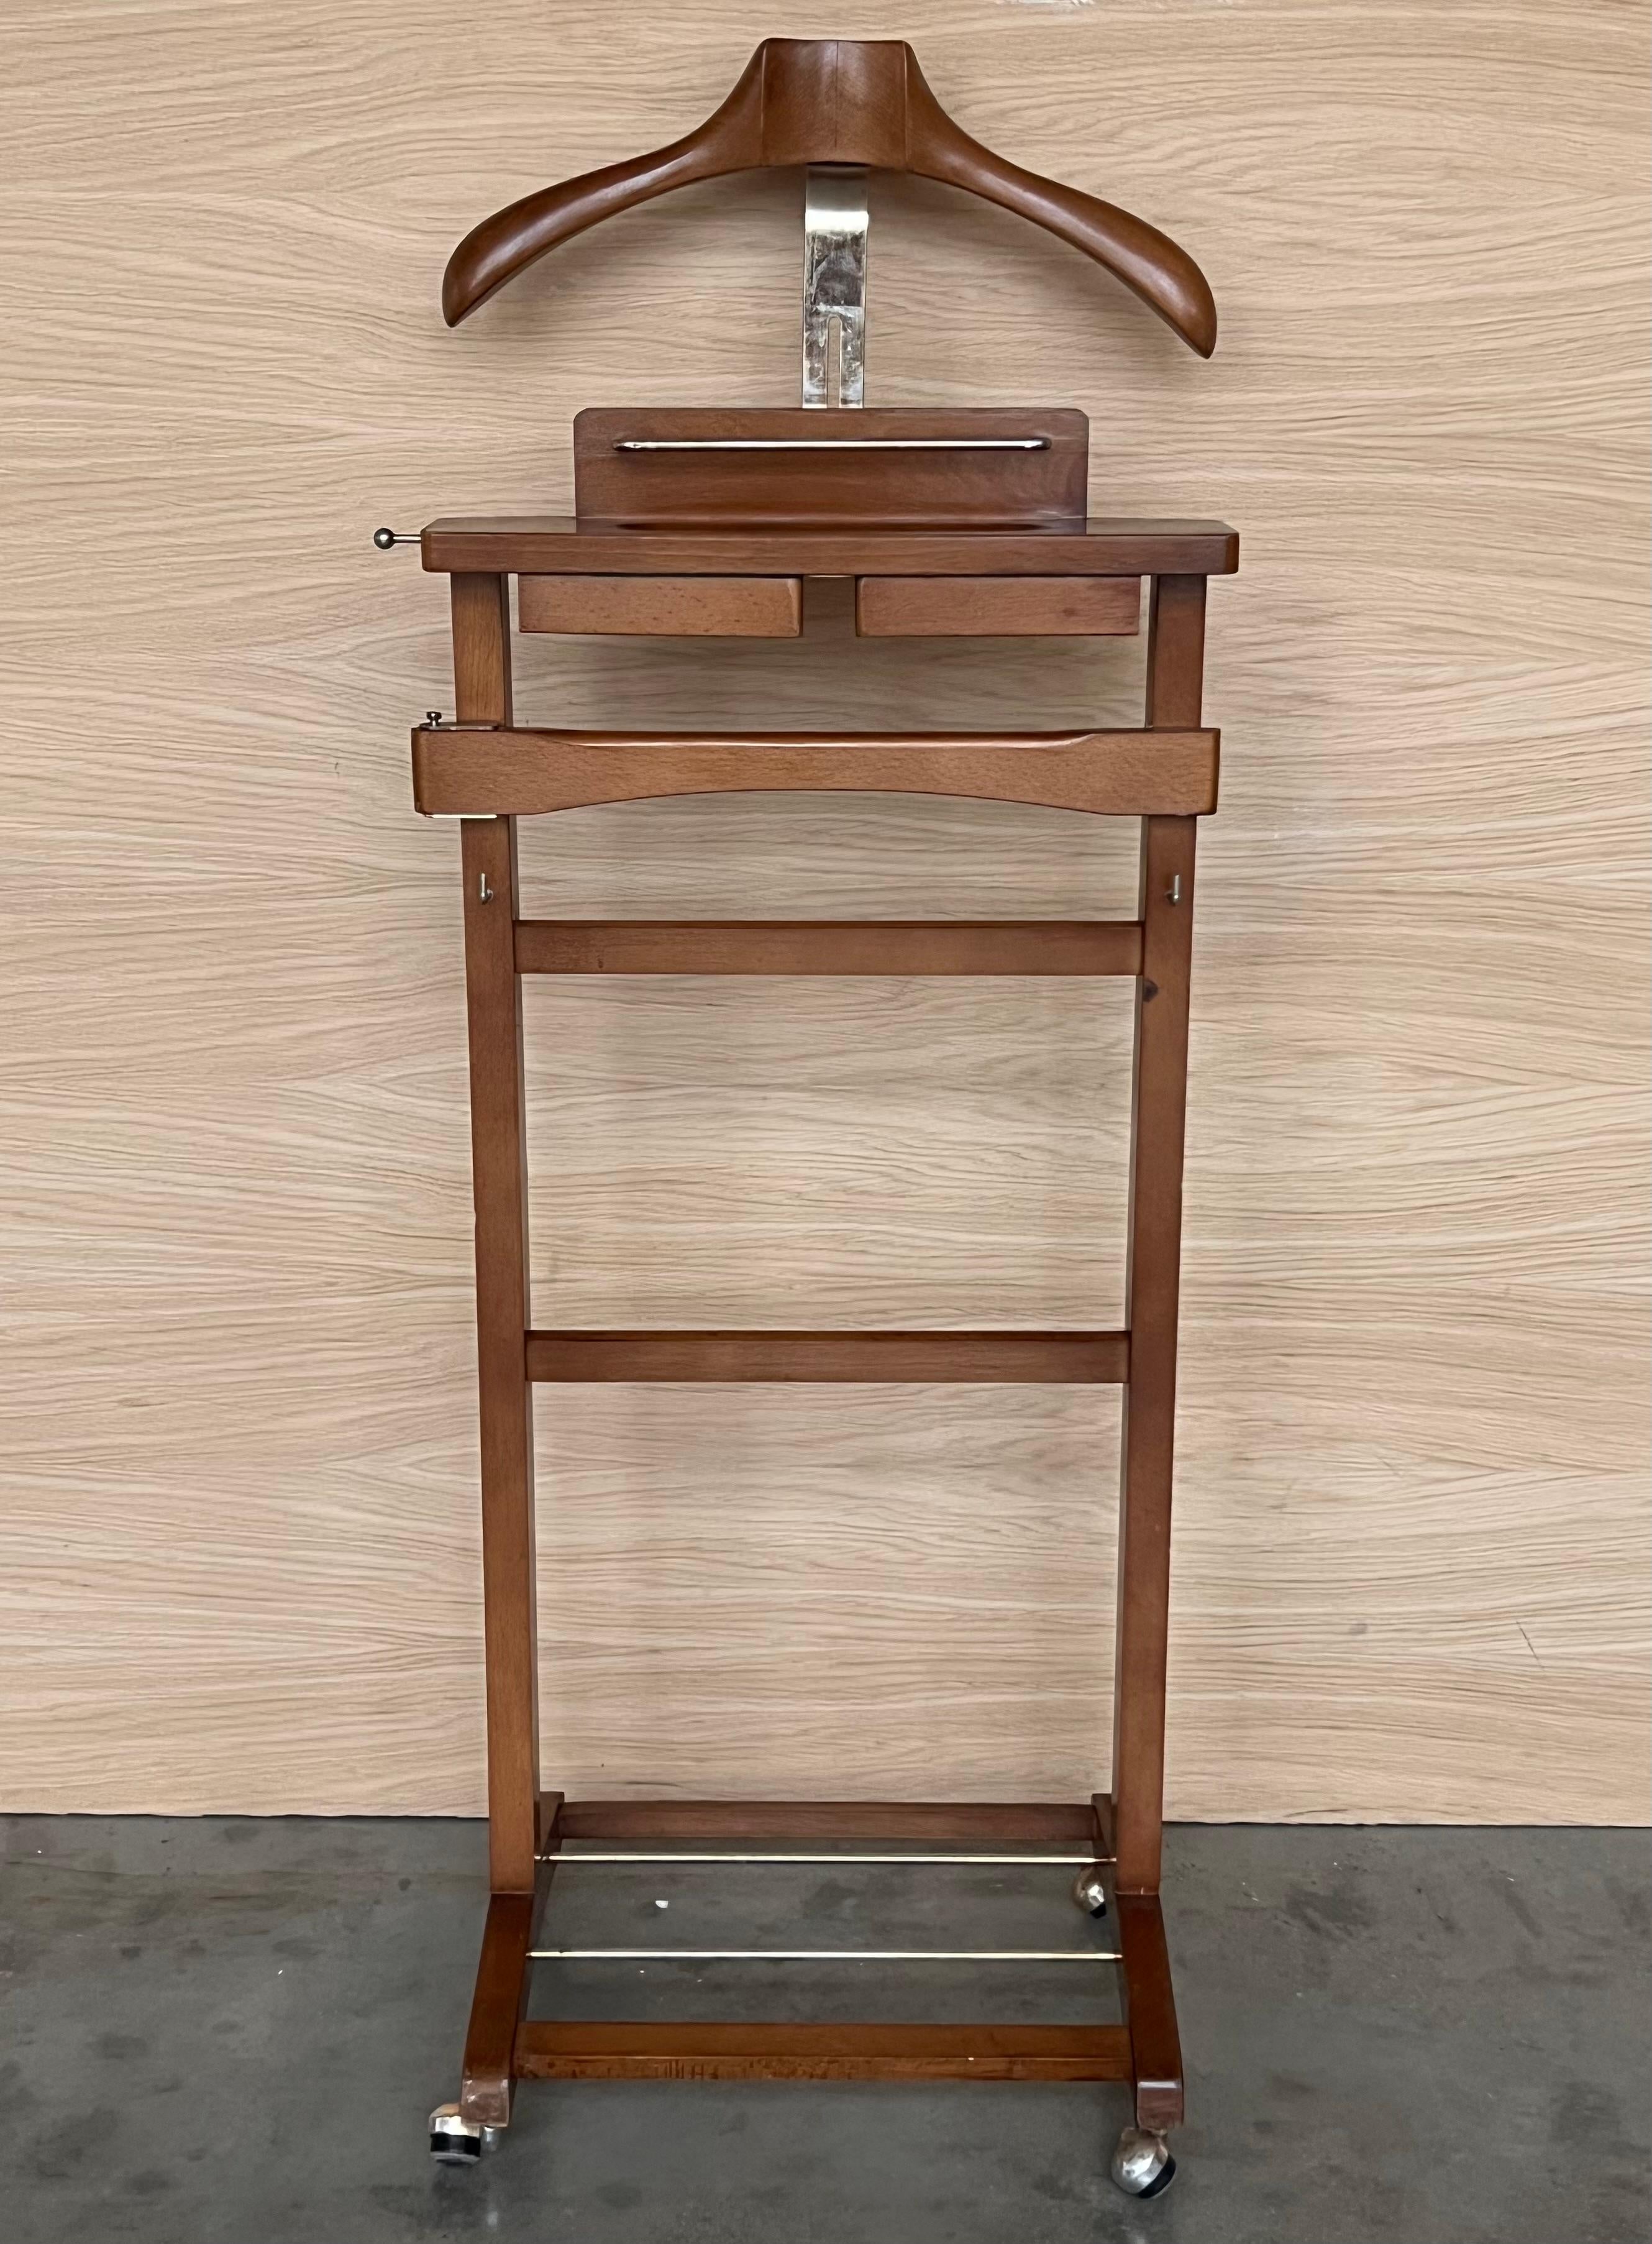 Ultra-rare mid-century beech wood and brass suit rack valet. This marvellous item was designed and produced during the 1960s in Italy. This extremely rare hanger is made of beech wood with nickel brass fittings.
A marvellous piece that will smarten